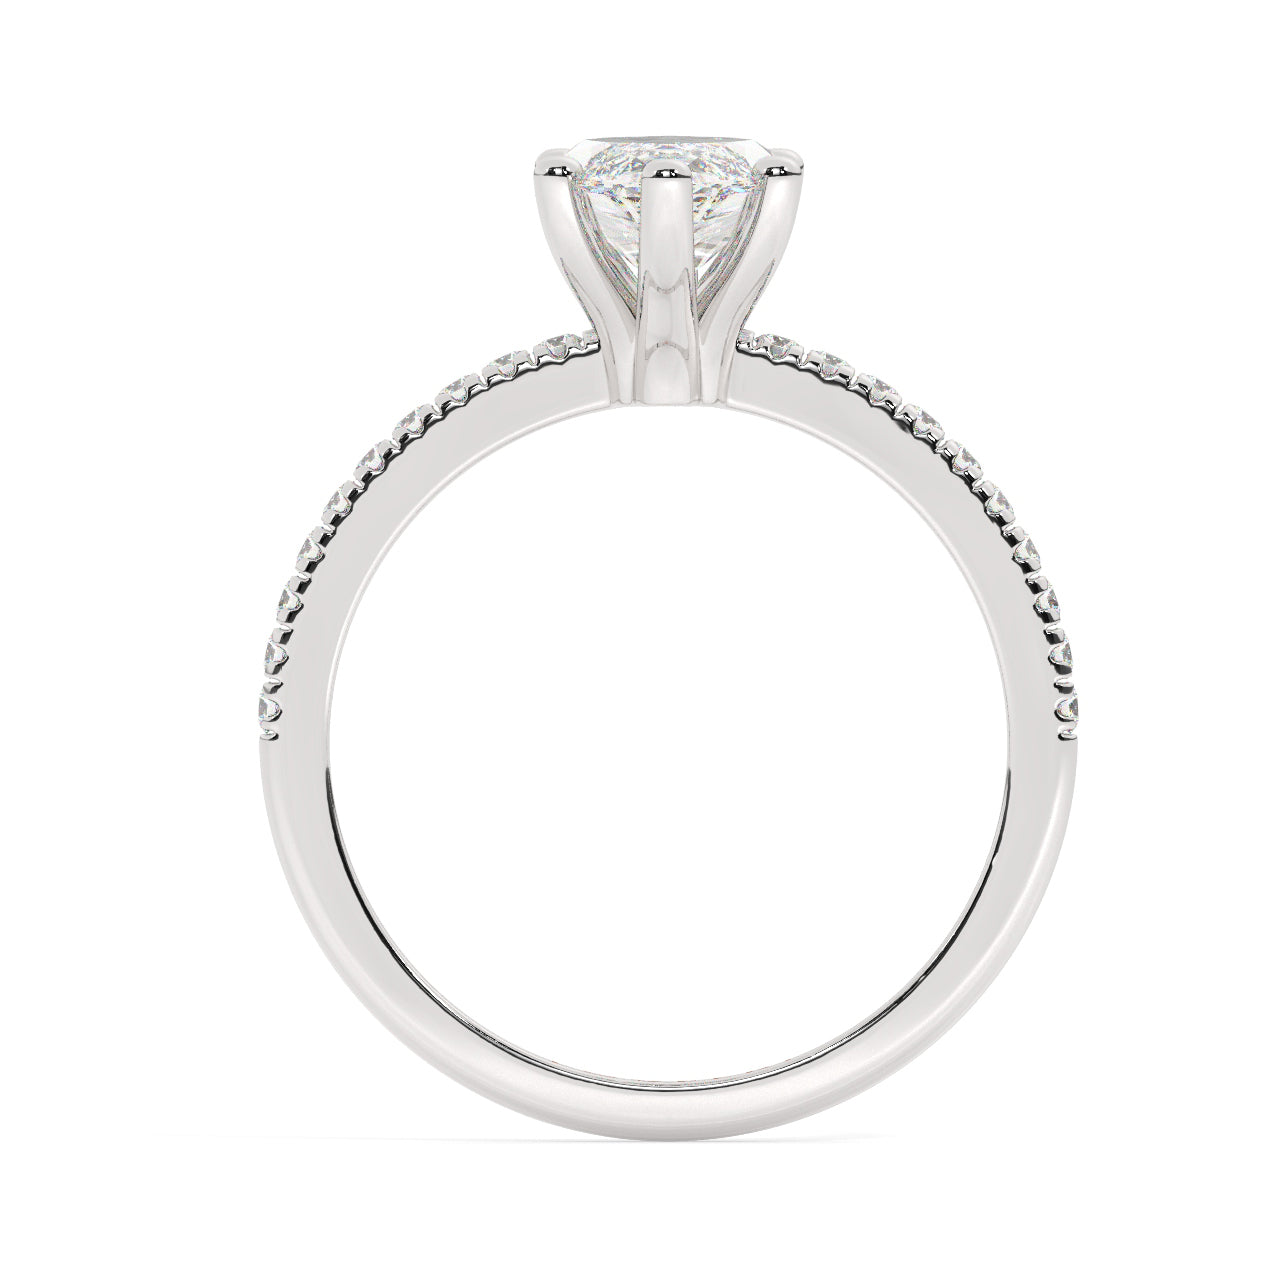 Marquise Cut Diamond Ring set on a Pavé Band in White Gold - Side View